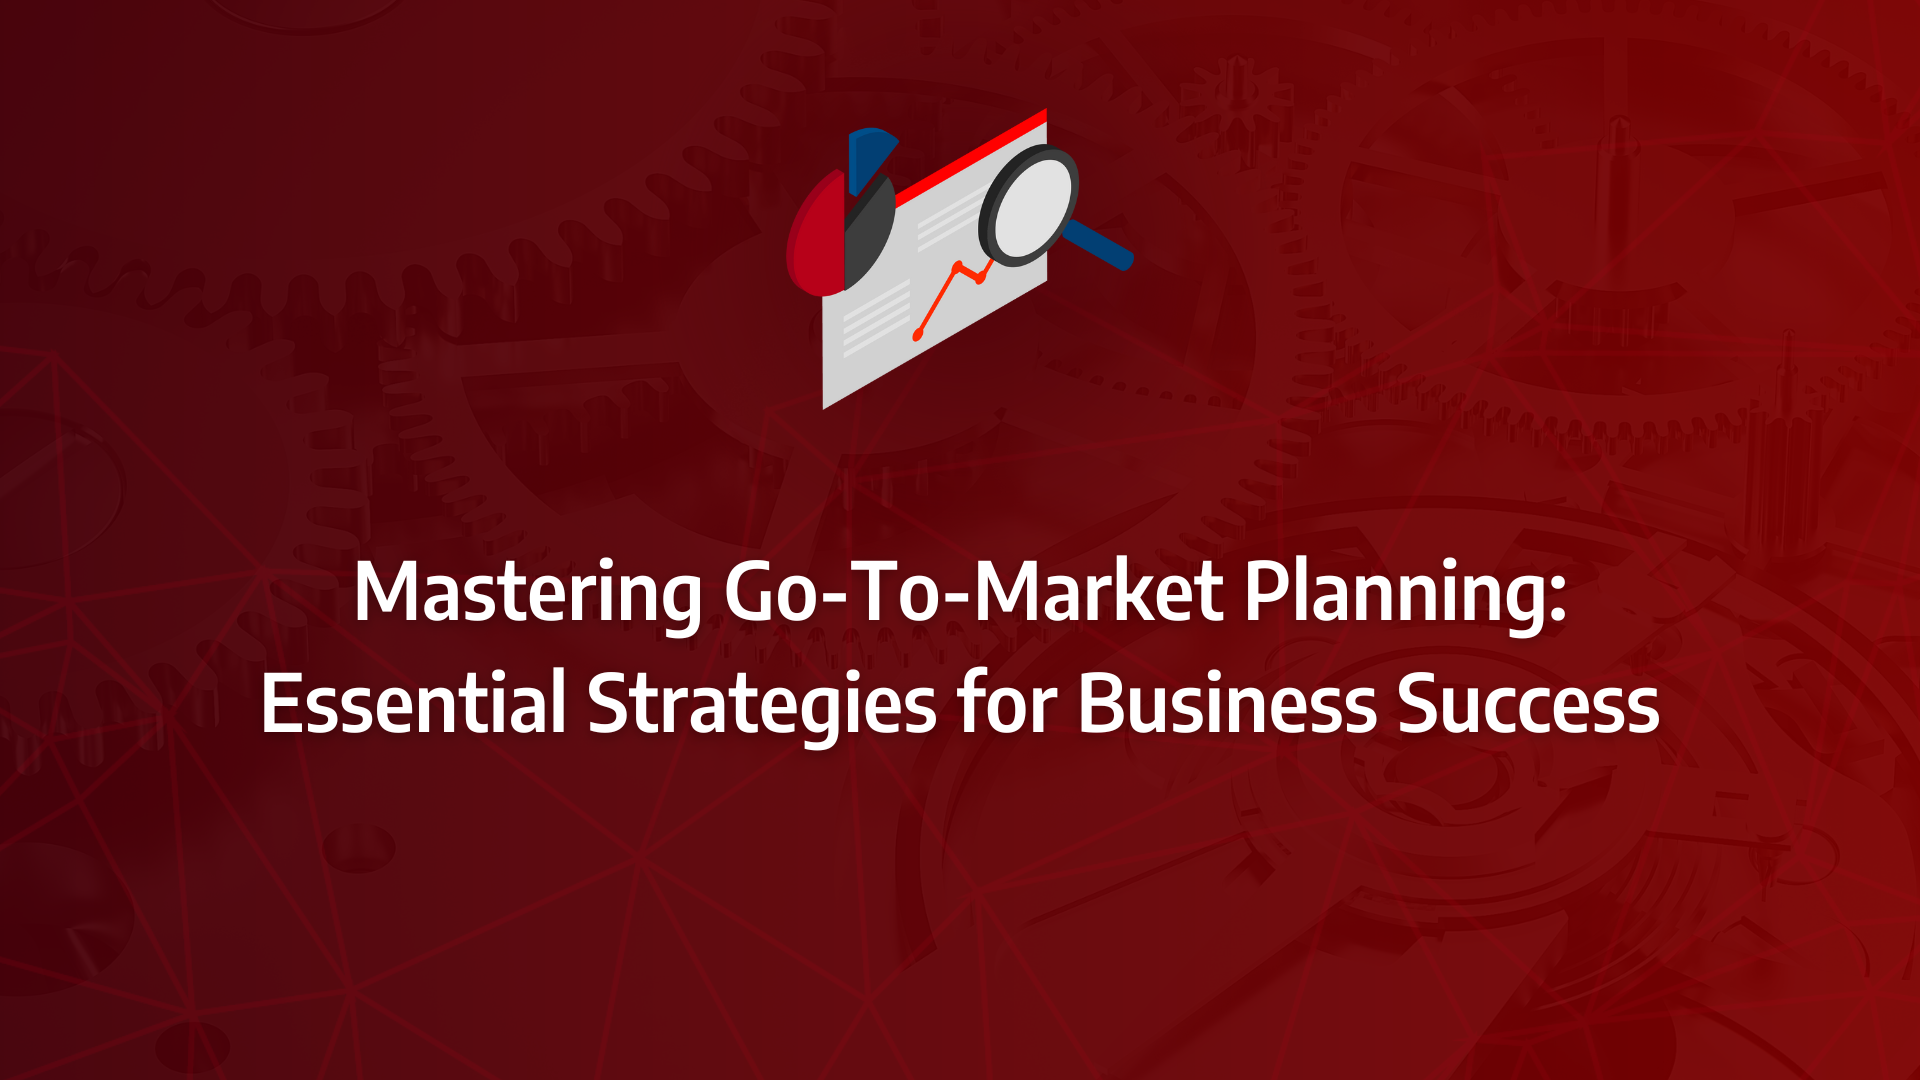 the ultimate guide to go to market planning incorporating go to market planning, go to market strategy, gtm strategy, and effective go to market.